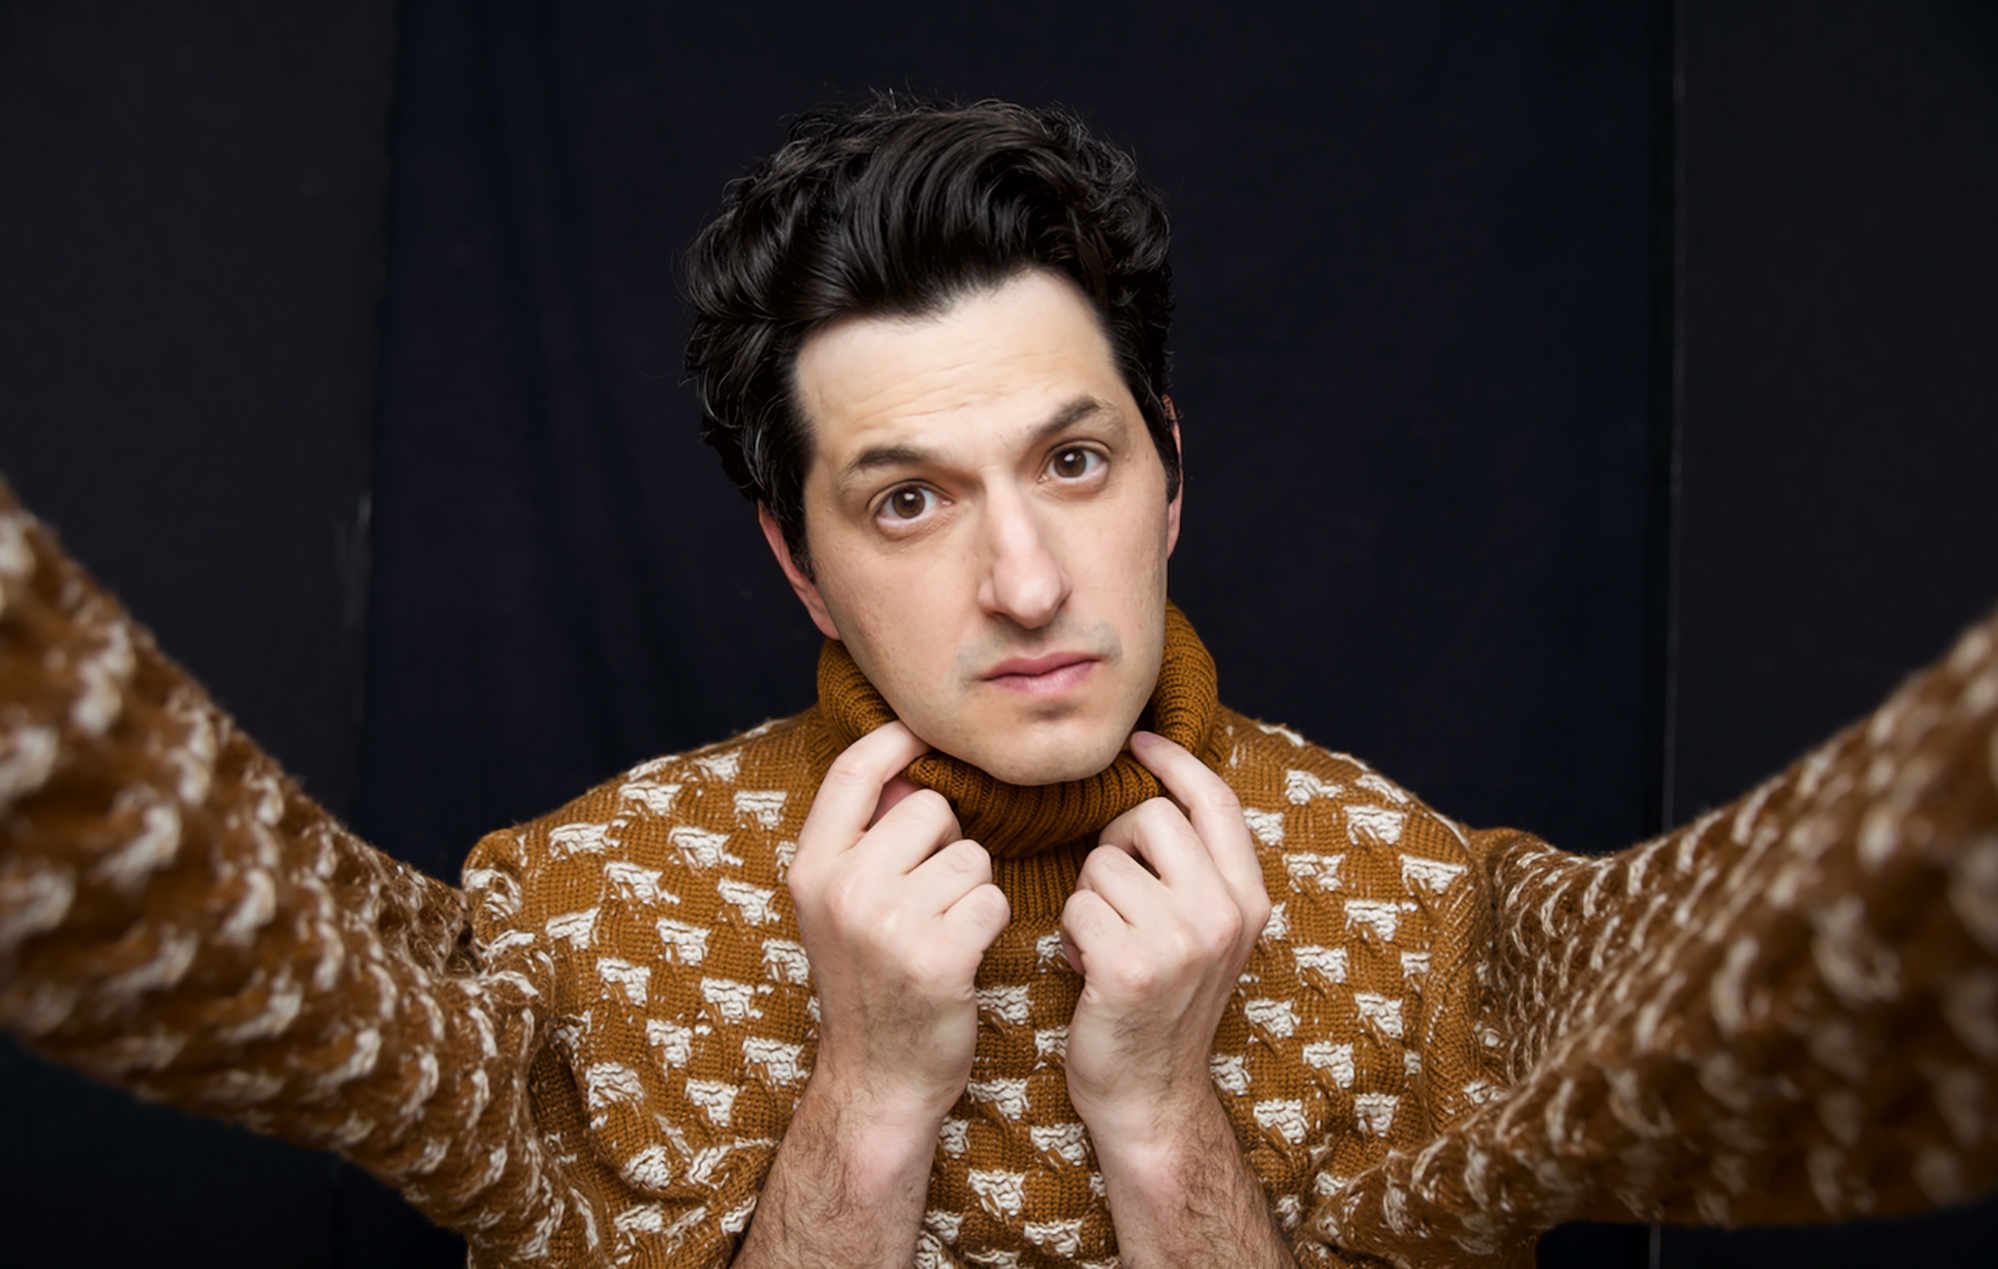 Ben Schwartz is on a mission to save improv: “So much comedy has been dying”